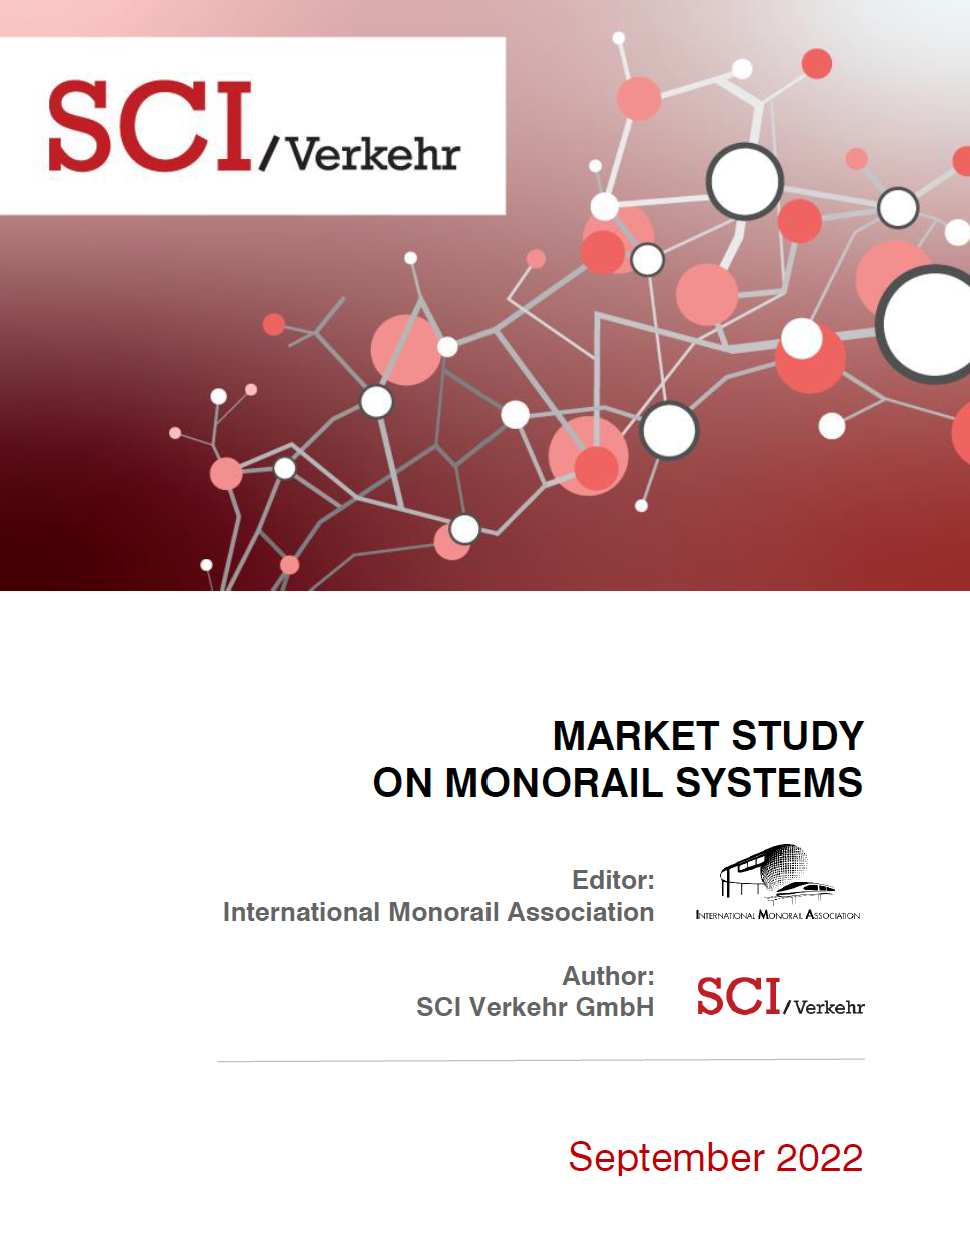 IMA SCI Market Study on Monorail Systems 2022